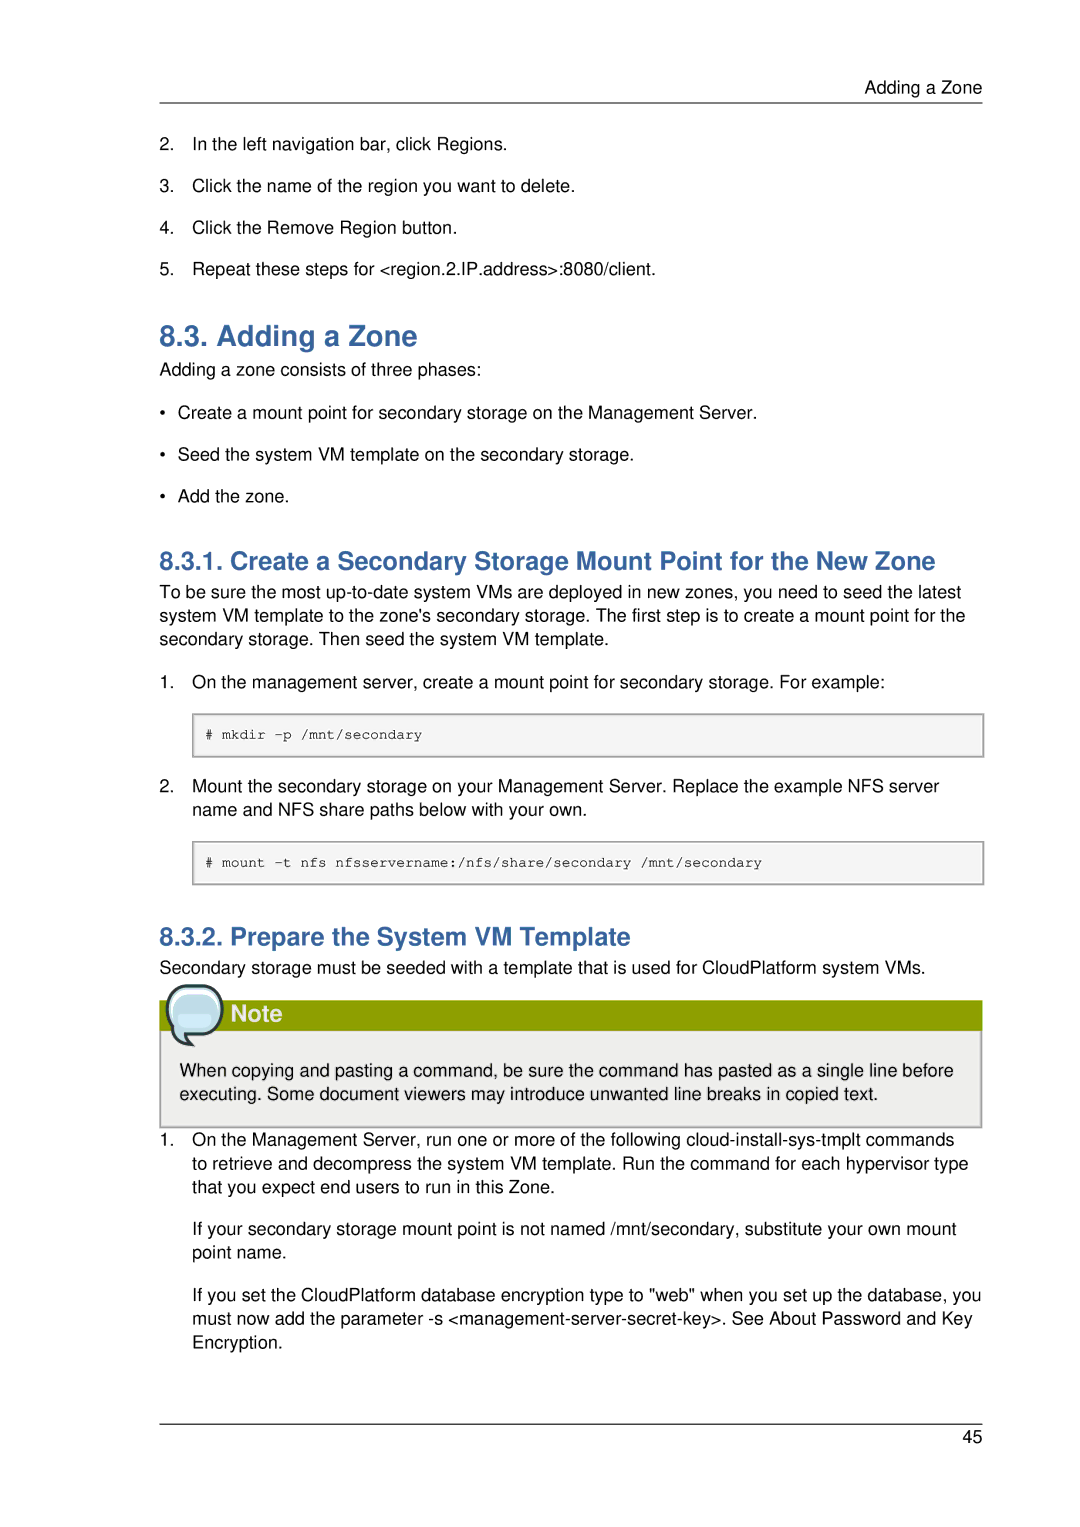 Citrix Systems 4.2 Adding a Zone, Create a Secondary Storage Mount Point for the New Zone, Prepare the System VM Template 